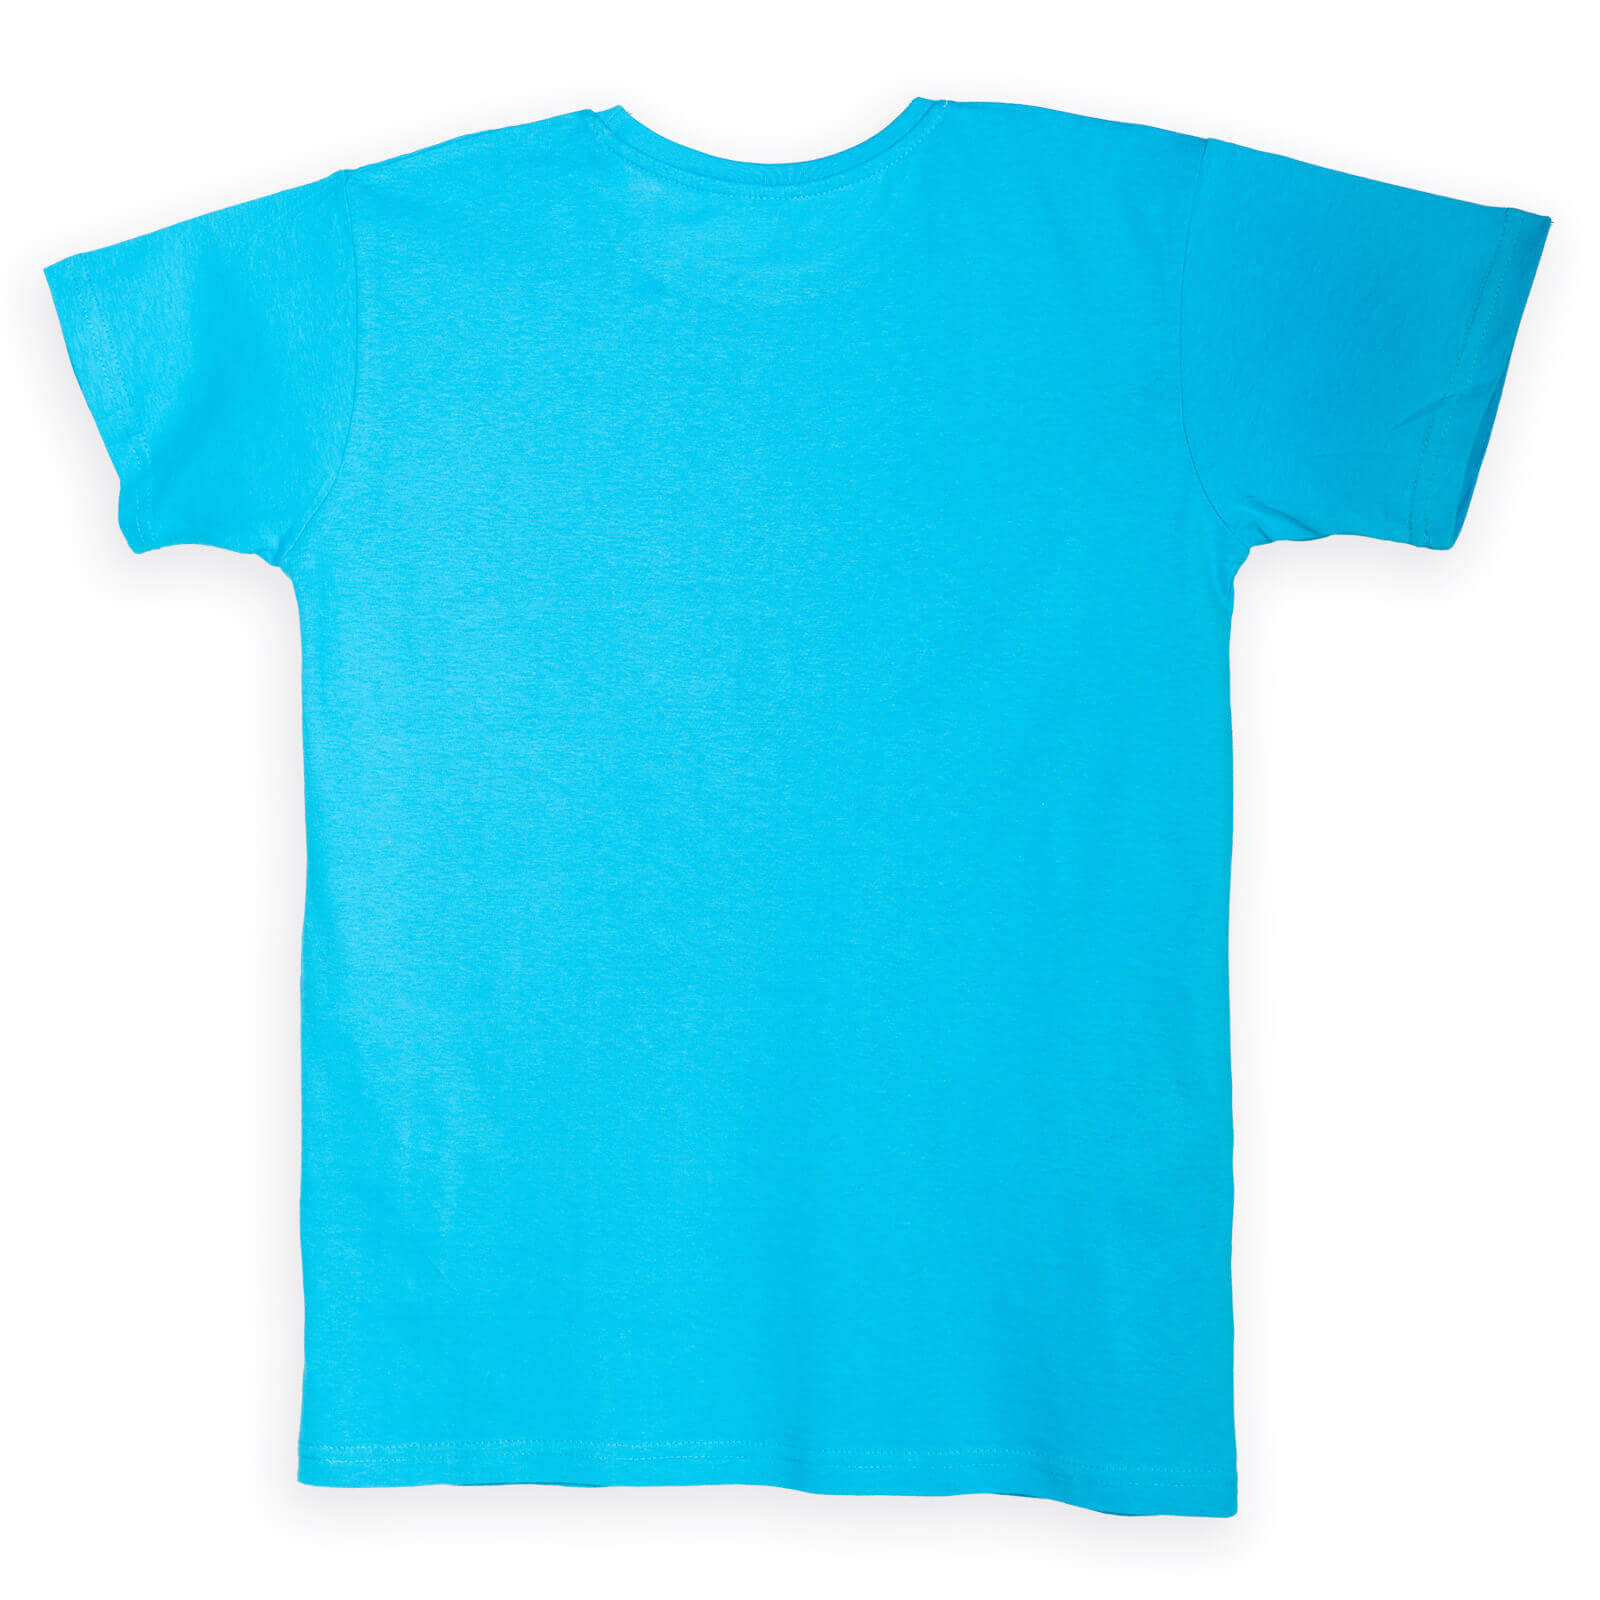 Kids T-shirt, Turquoise - Women's World Cup Spain & Netherlands 2022 